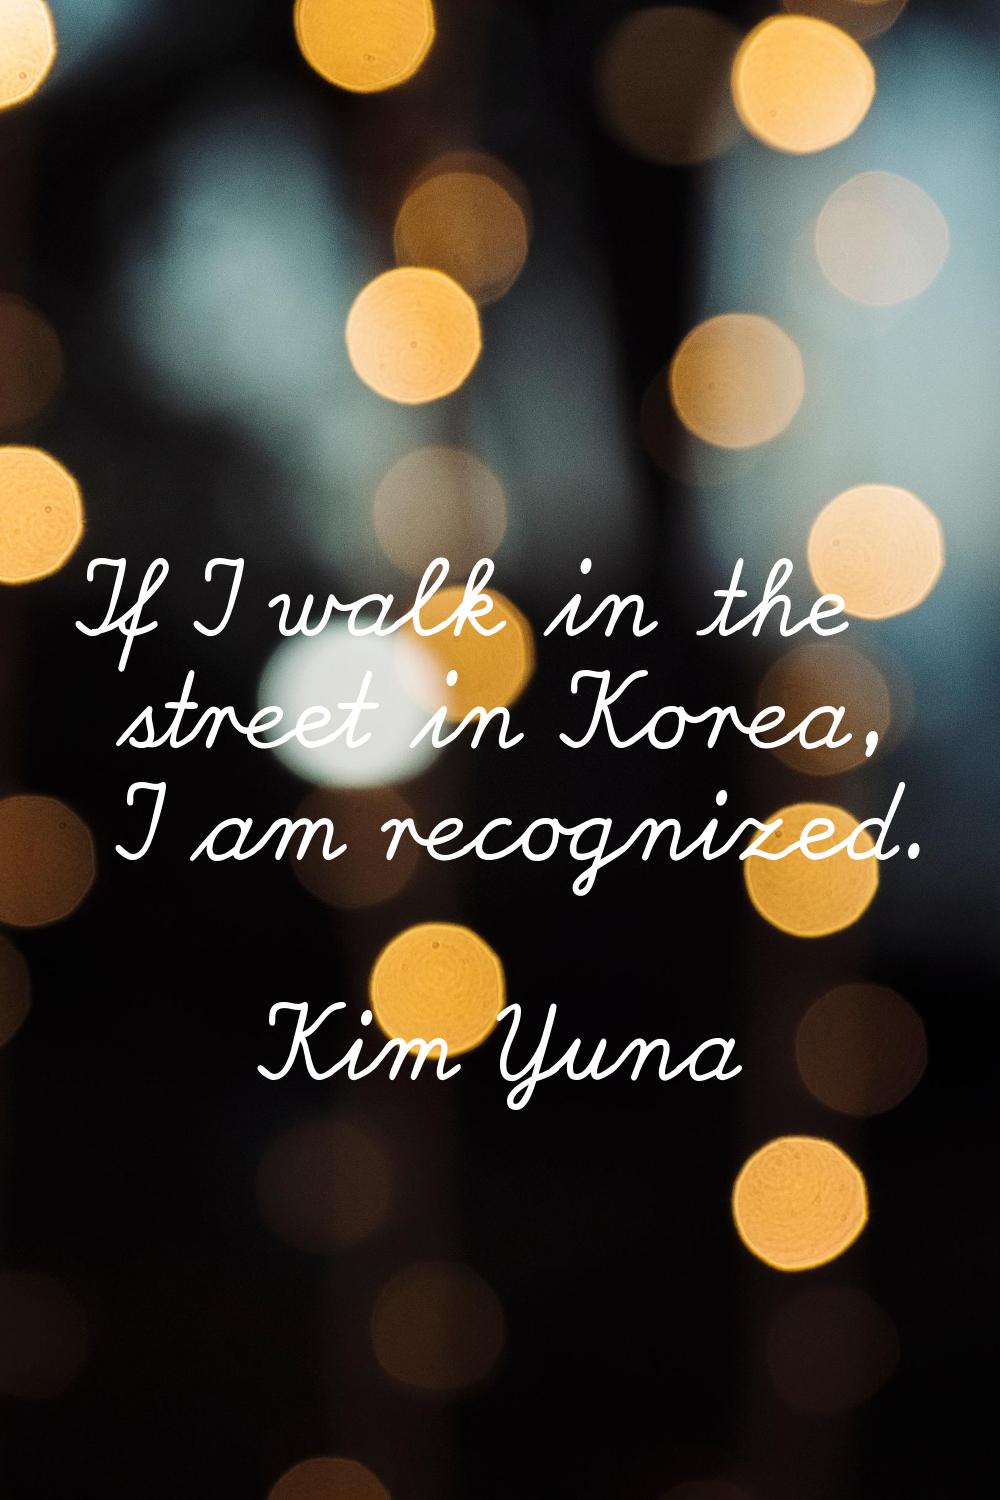 If I walk in the street in Korea, I am recognized.